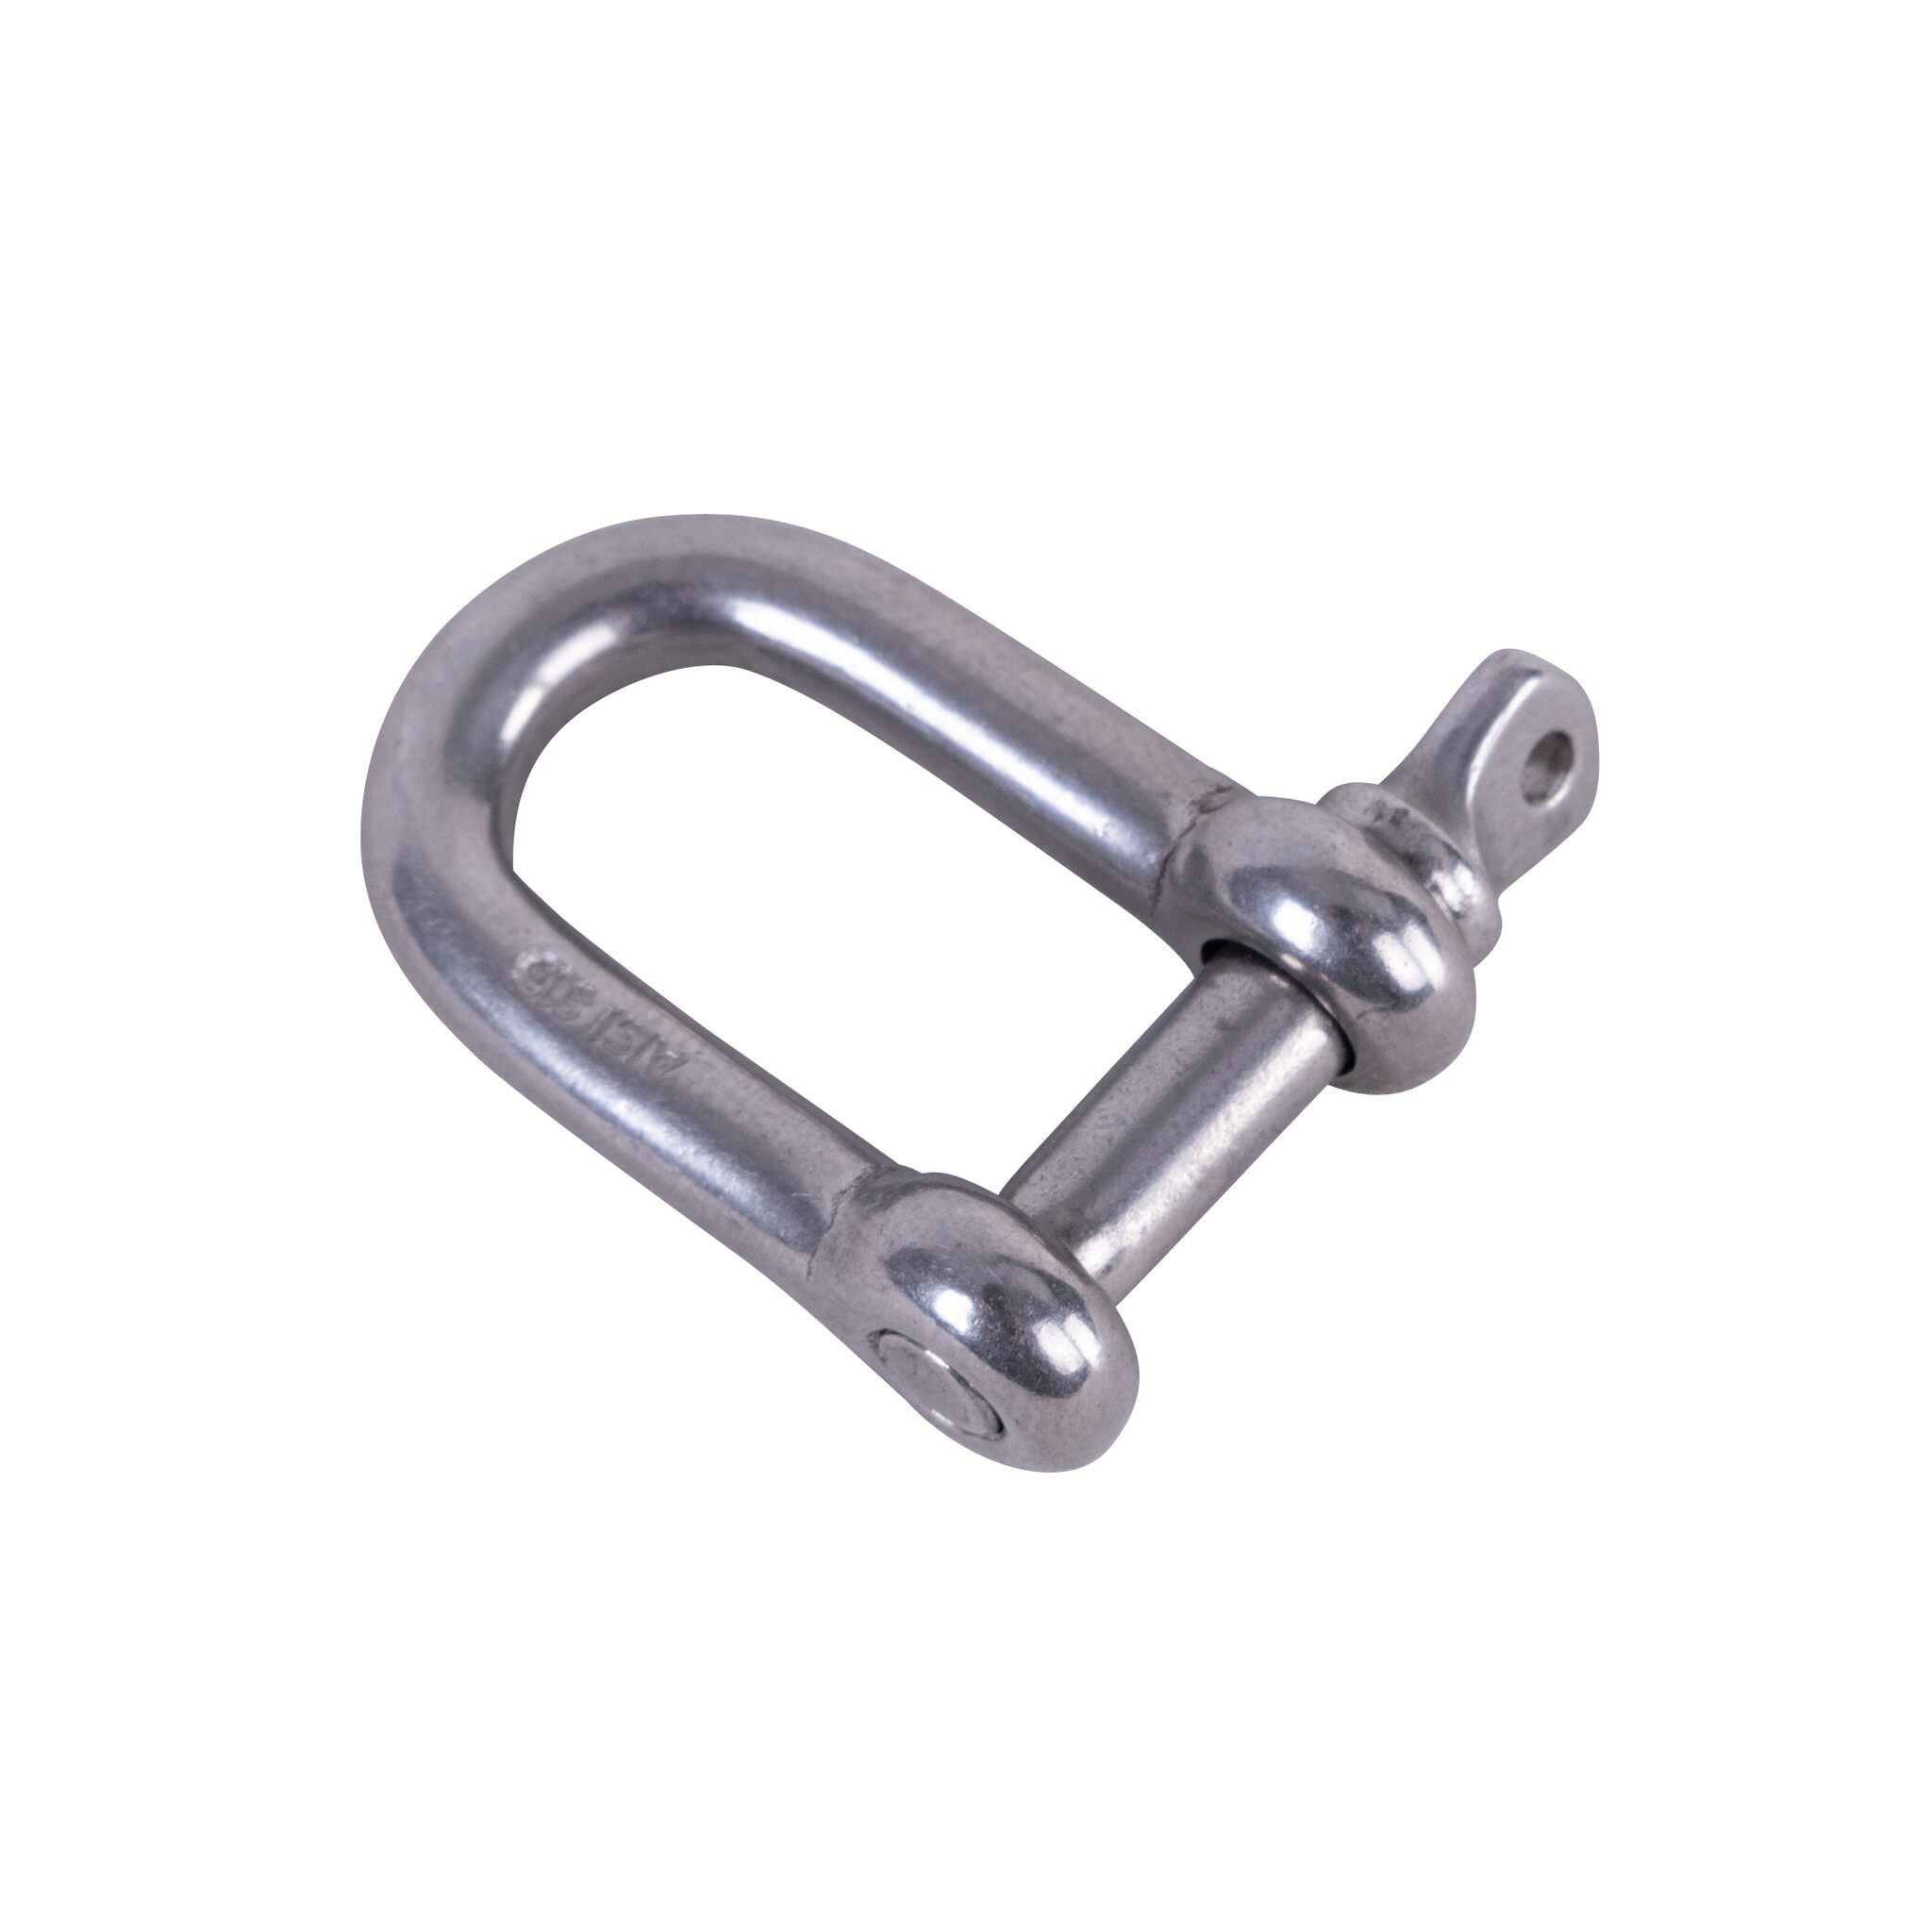 Shackle straight, forged